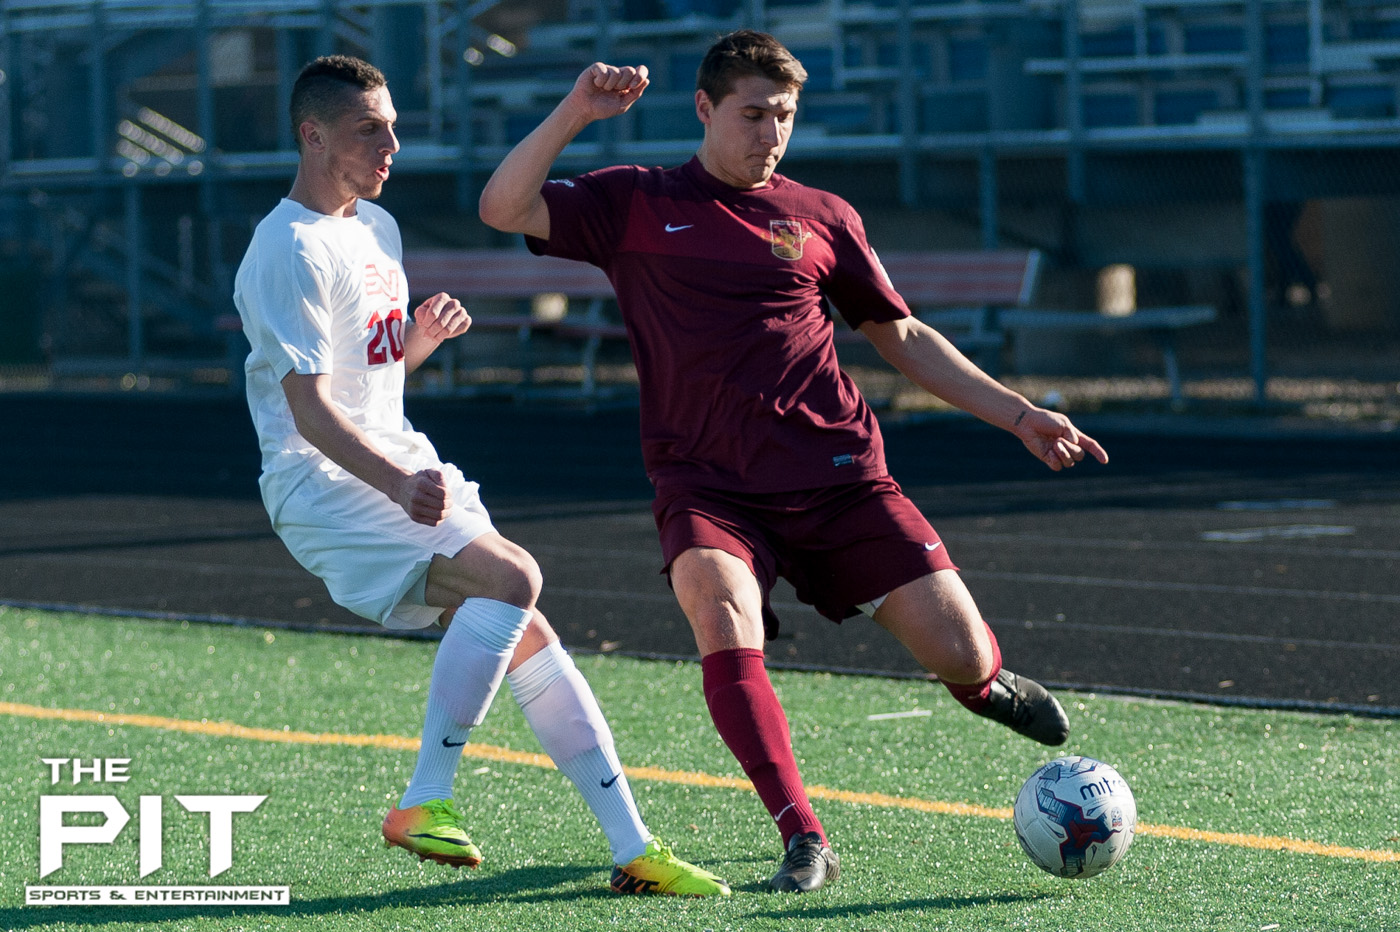 Detroit City FC Forward Wade Allan (16) fights for ball control against an opposing Saginaw Valley Forward at a scrimmage match on April 19, 2014 at Hurley Field. Brian Quintos / The Pit: SE